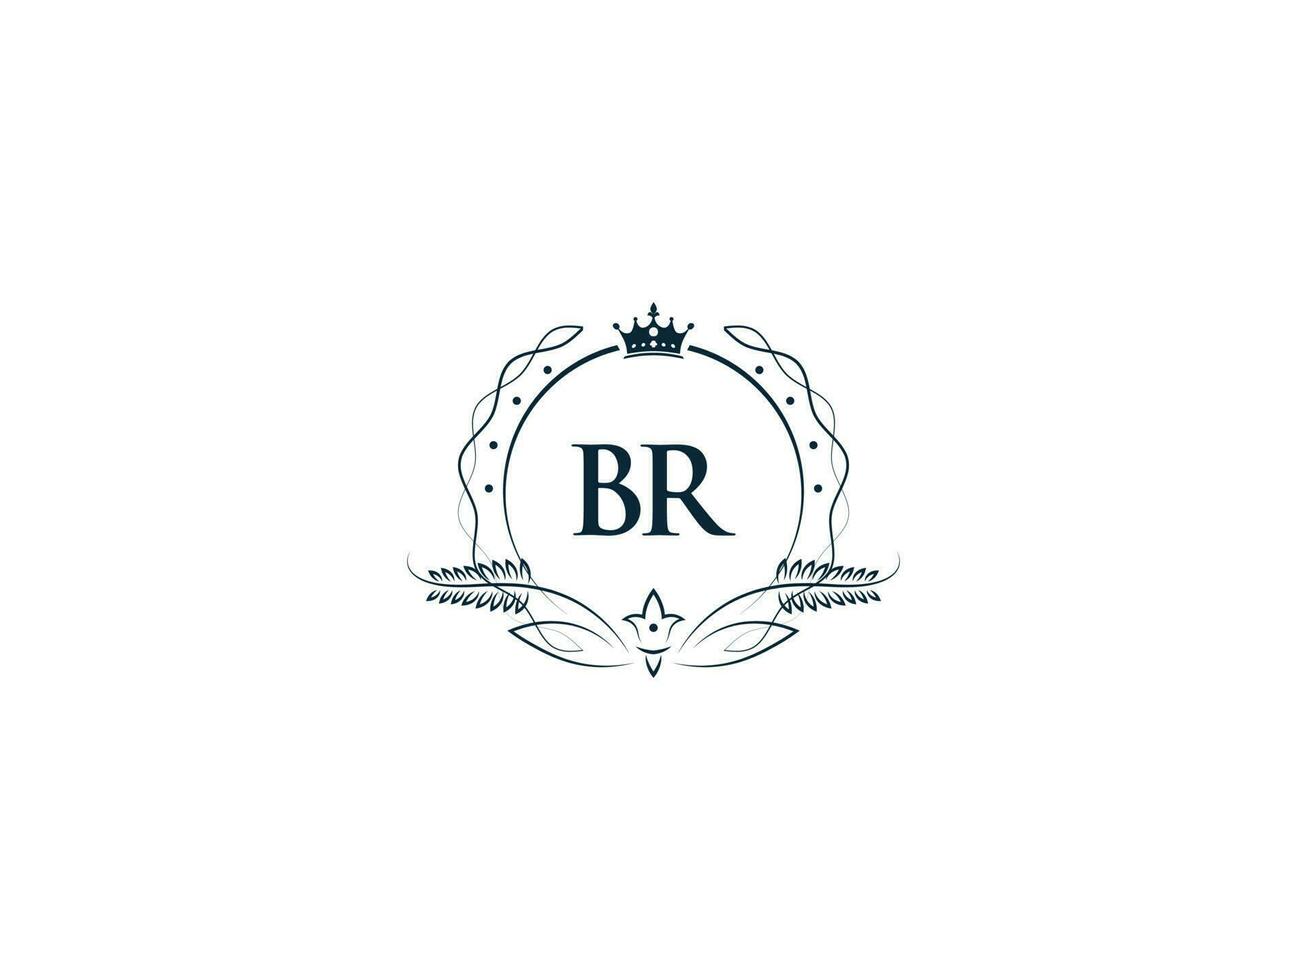 Professional Br Luxury Business Logo, Feminine Crown Br rb Logo Letter Vector Icon